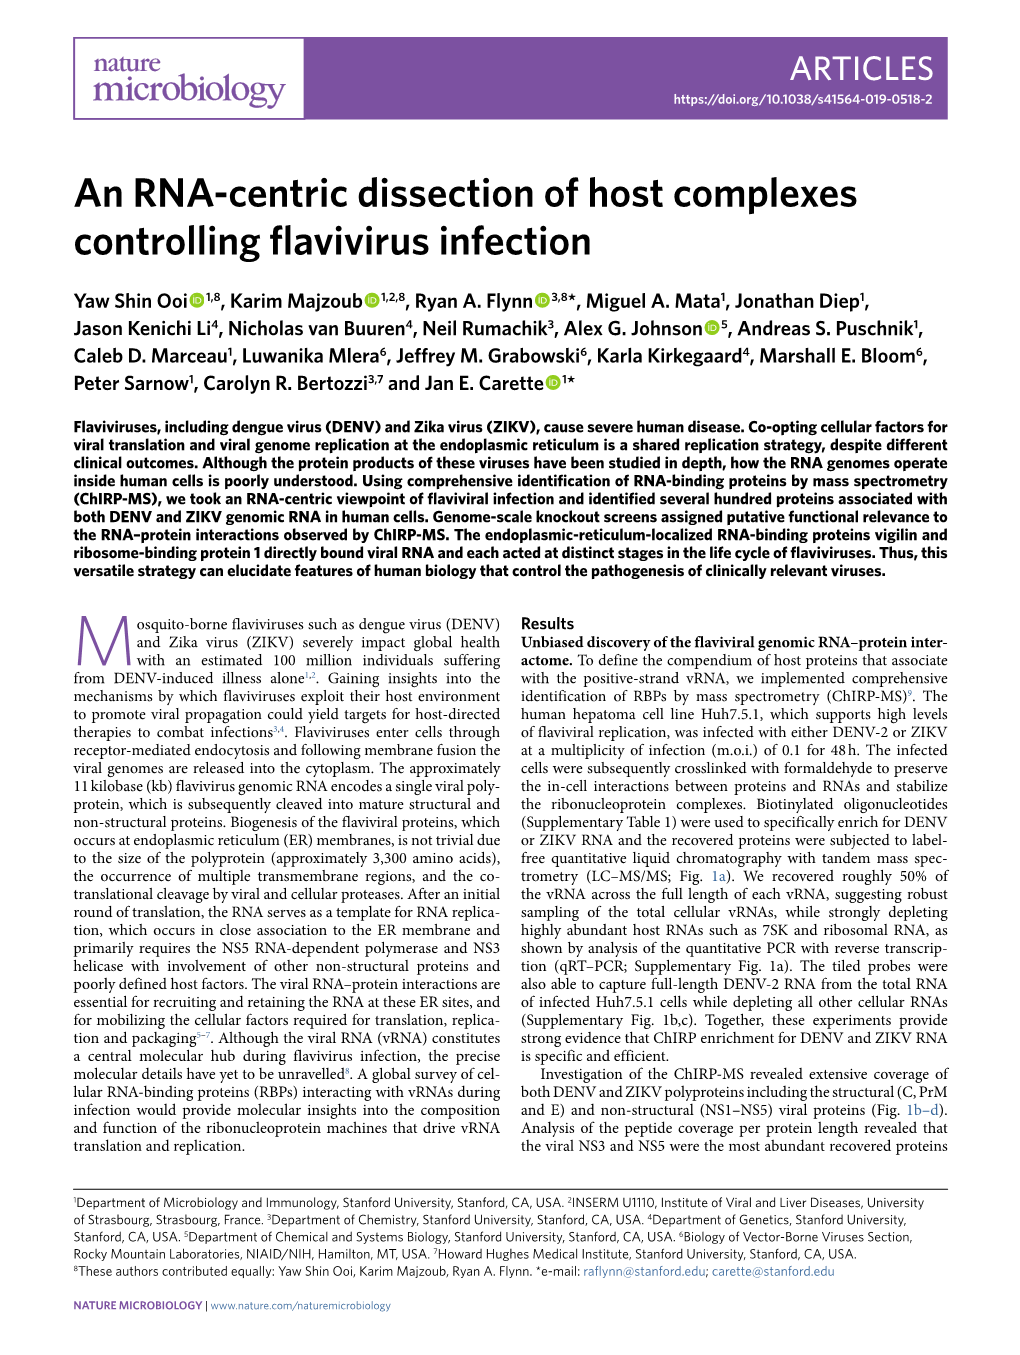 An RNA-Centric Dissection of Host Complexes Controlling Flavivirus Infection